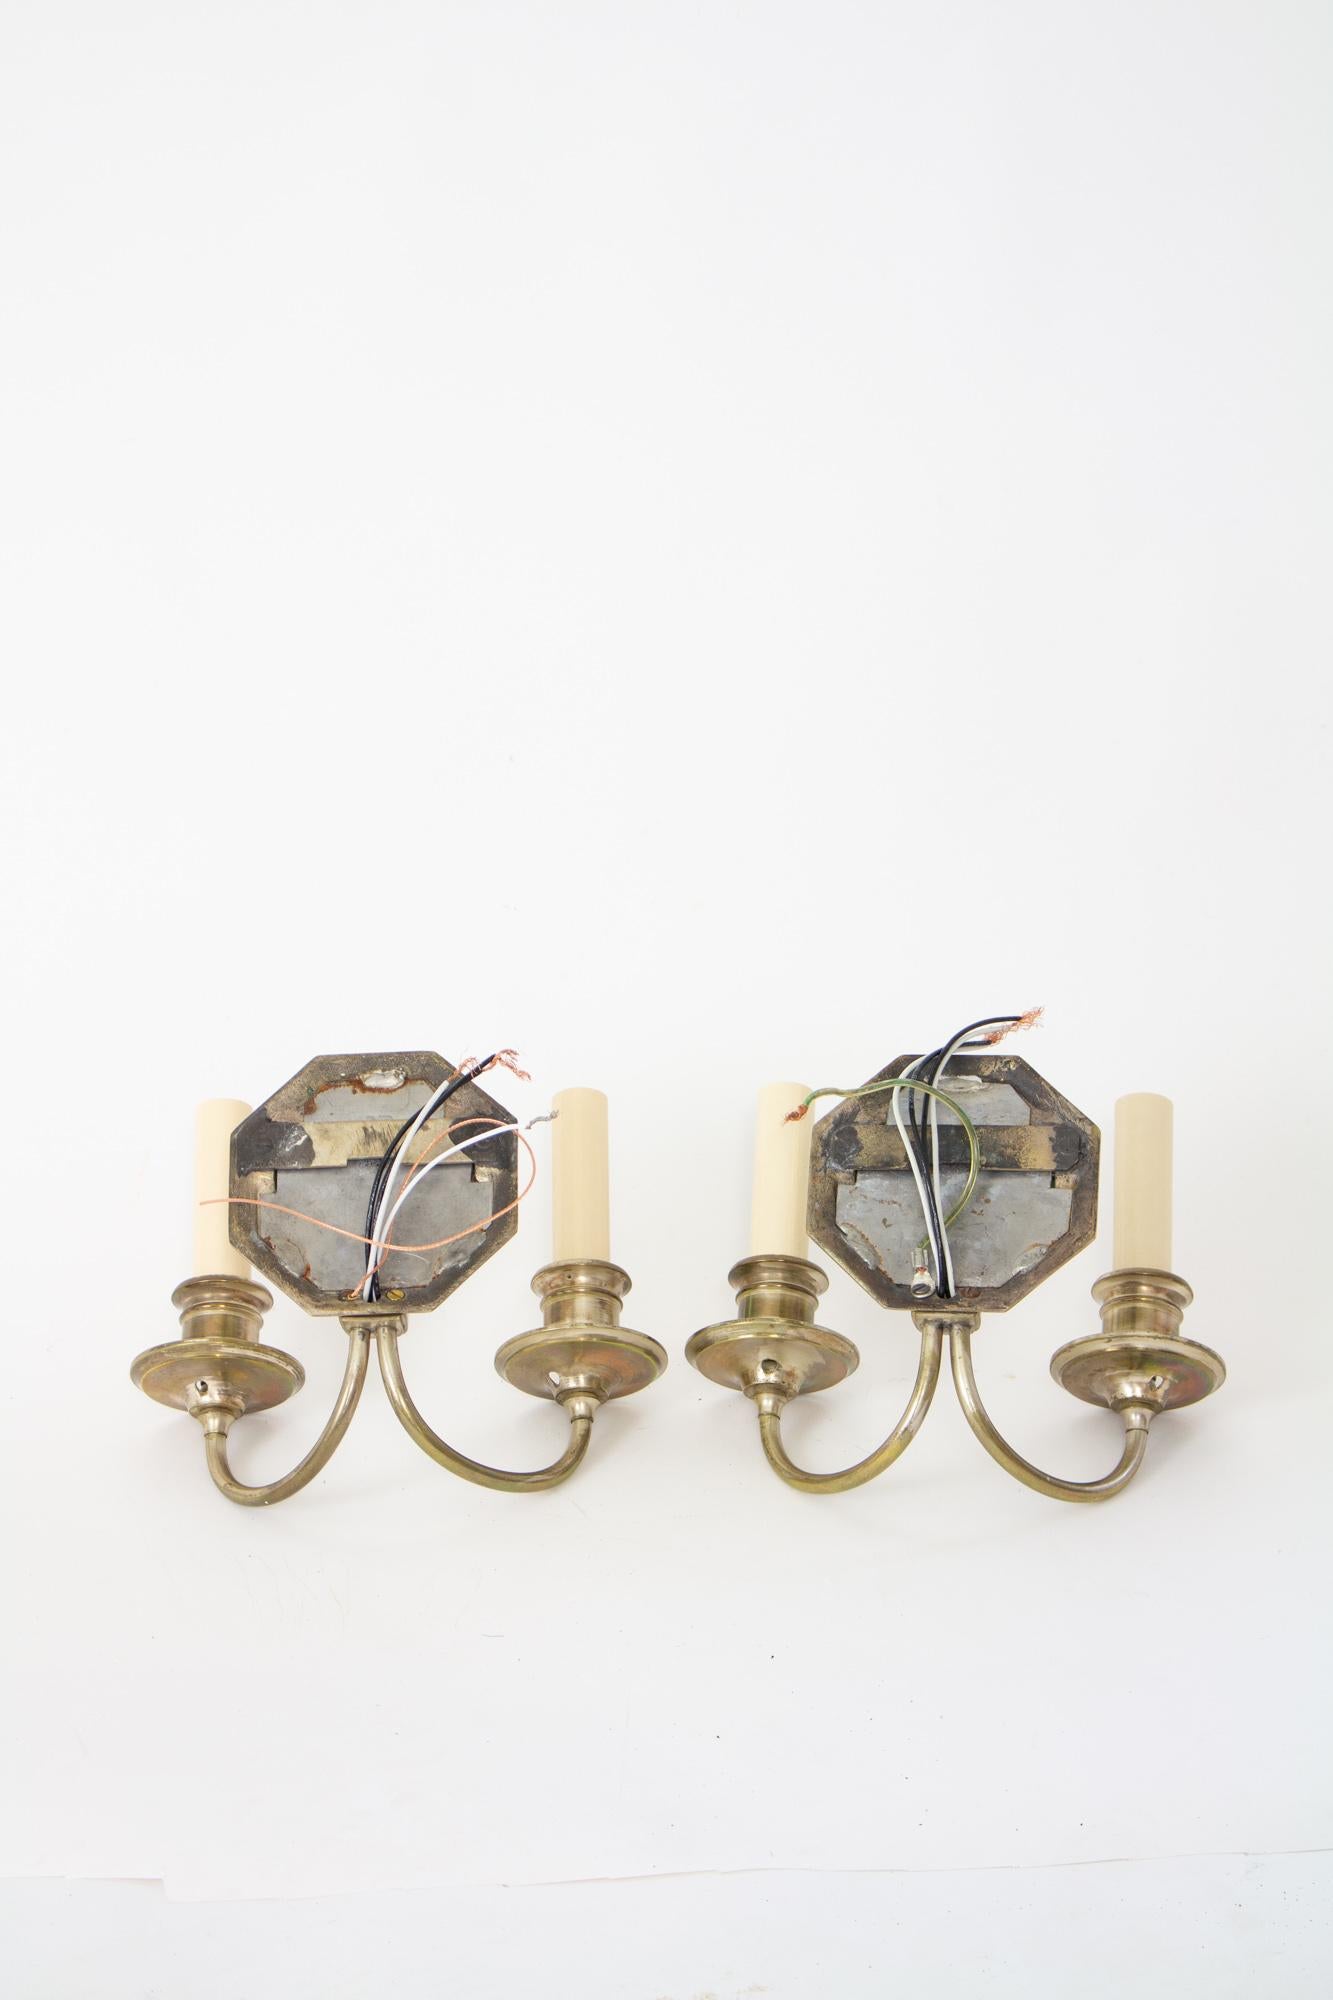 American S378 Early 20th Century Octagonal Mirror Back Sconces, a Pair